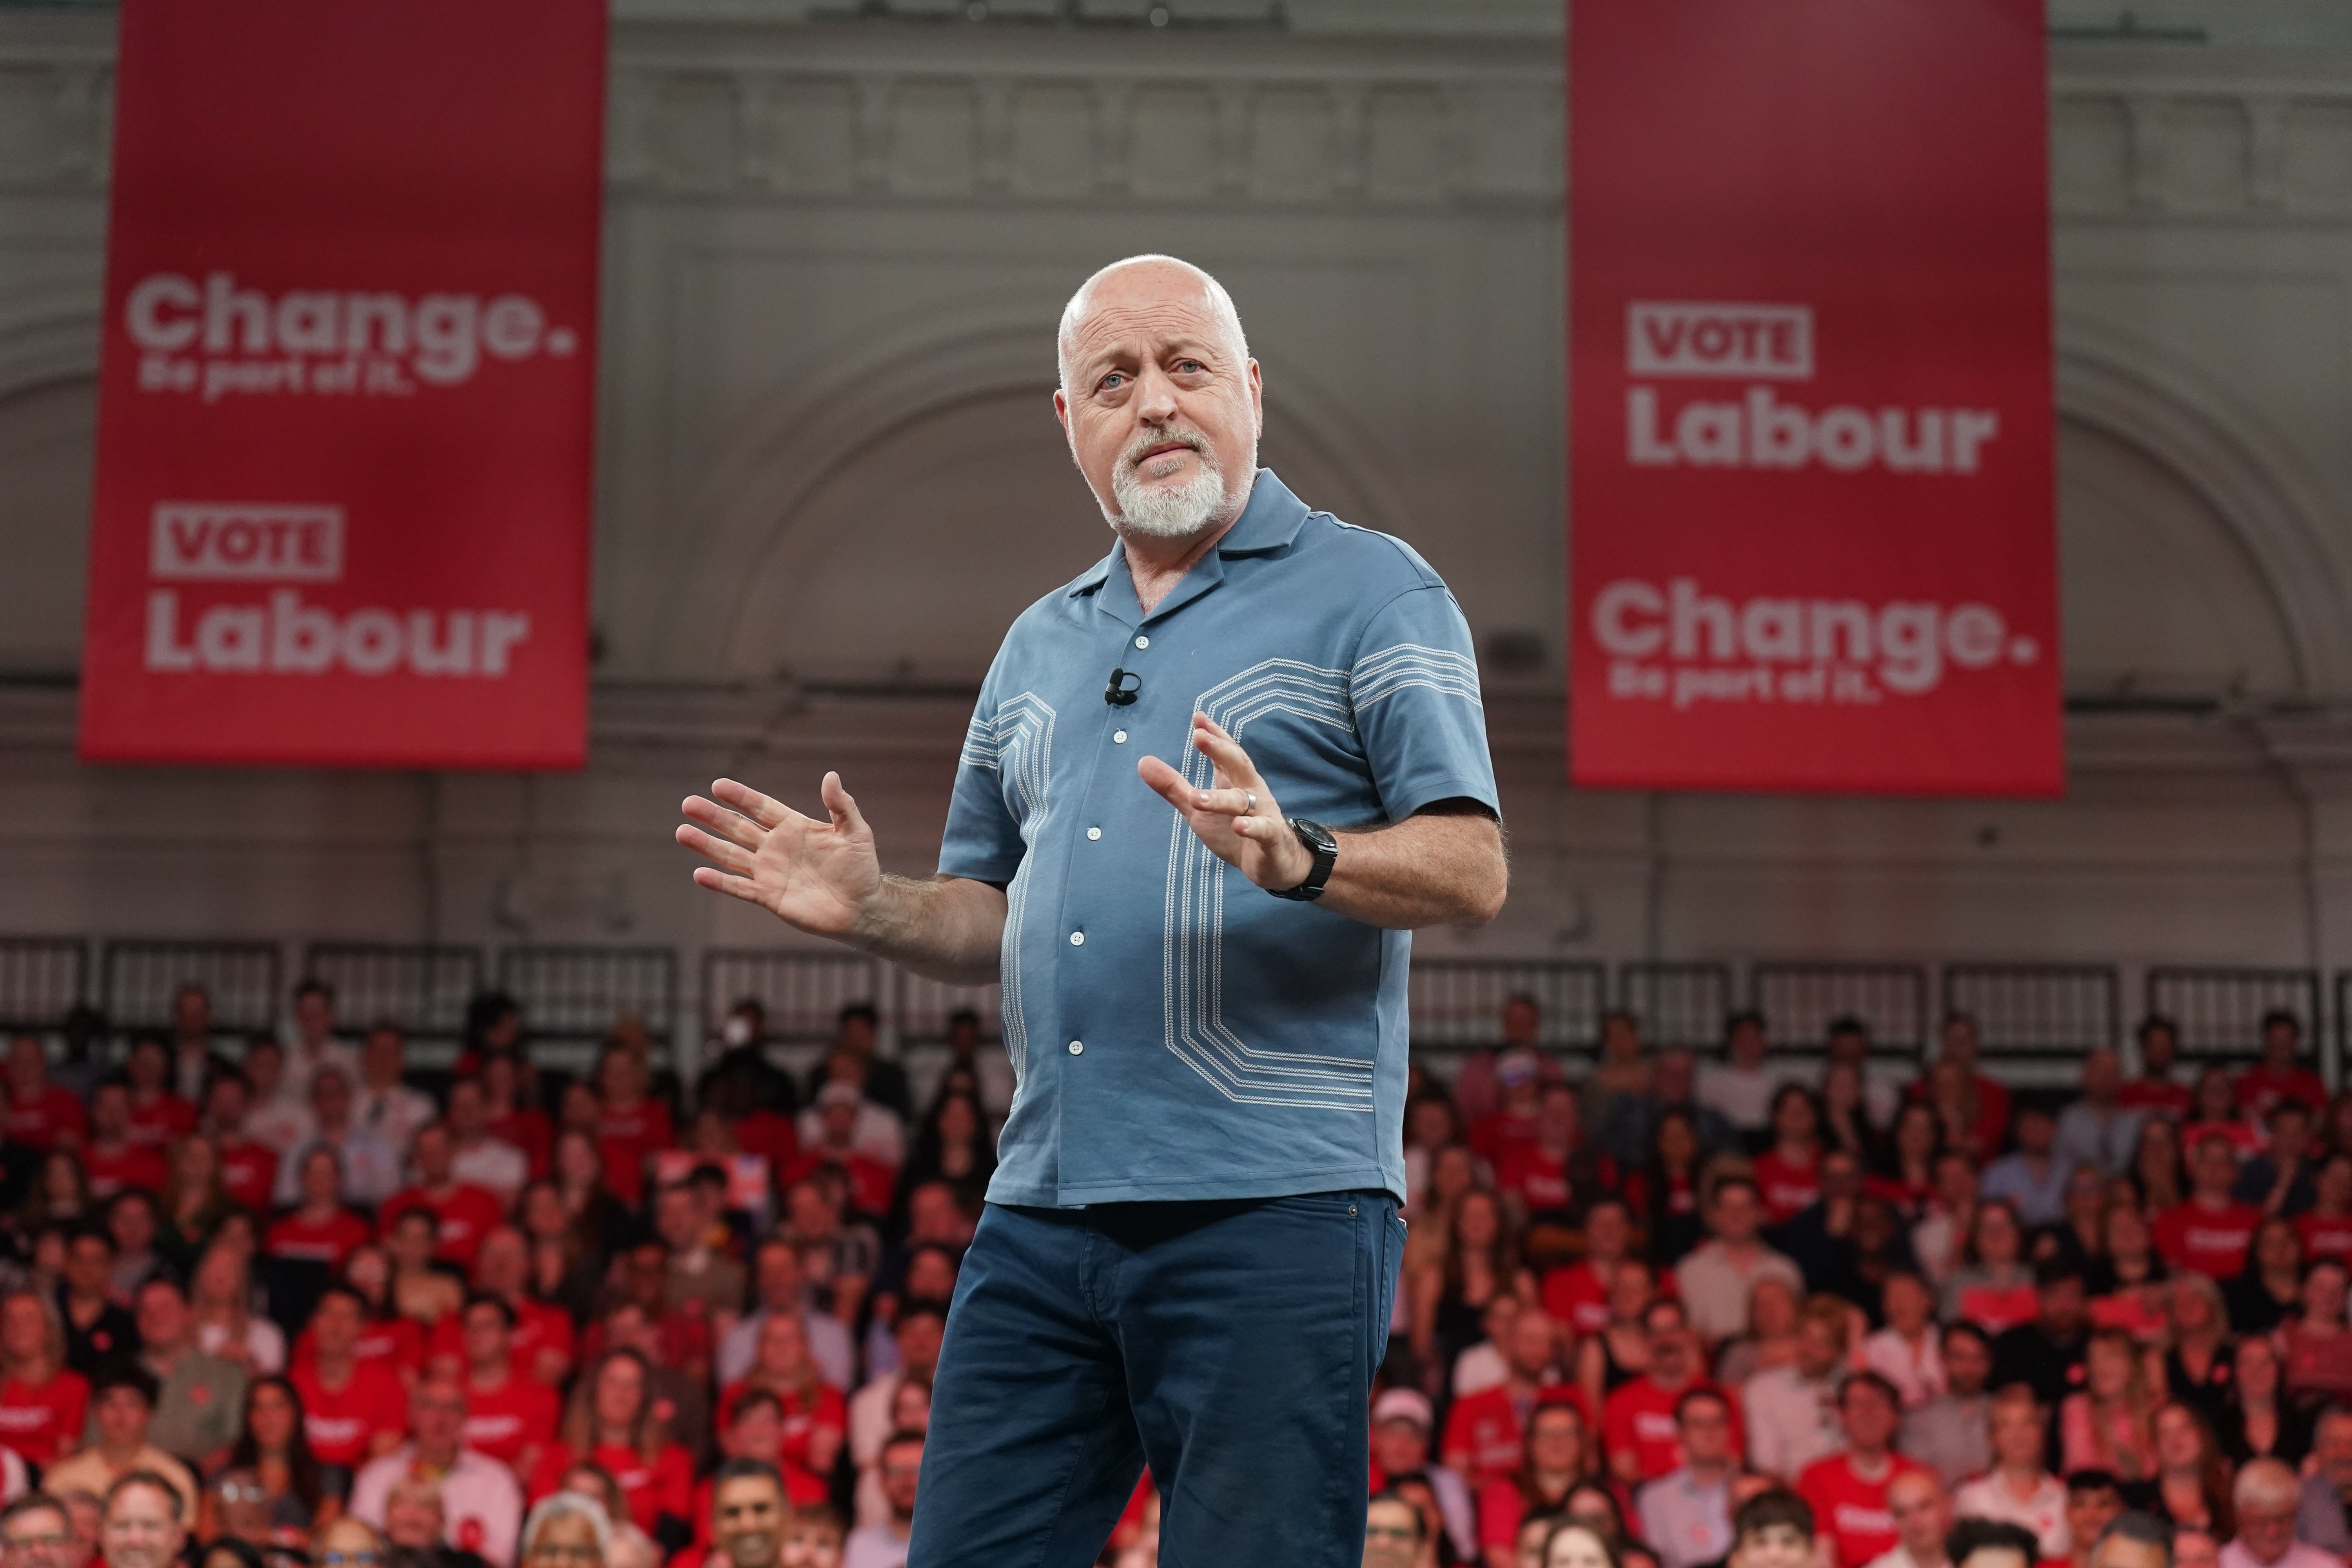 Musician and comedian Bill Bailey addressed the Labour rally, while there were video endorsements from celebrities including Sir Elton John